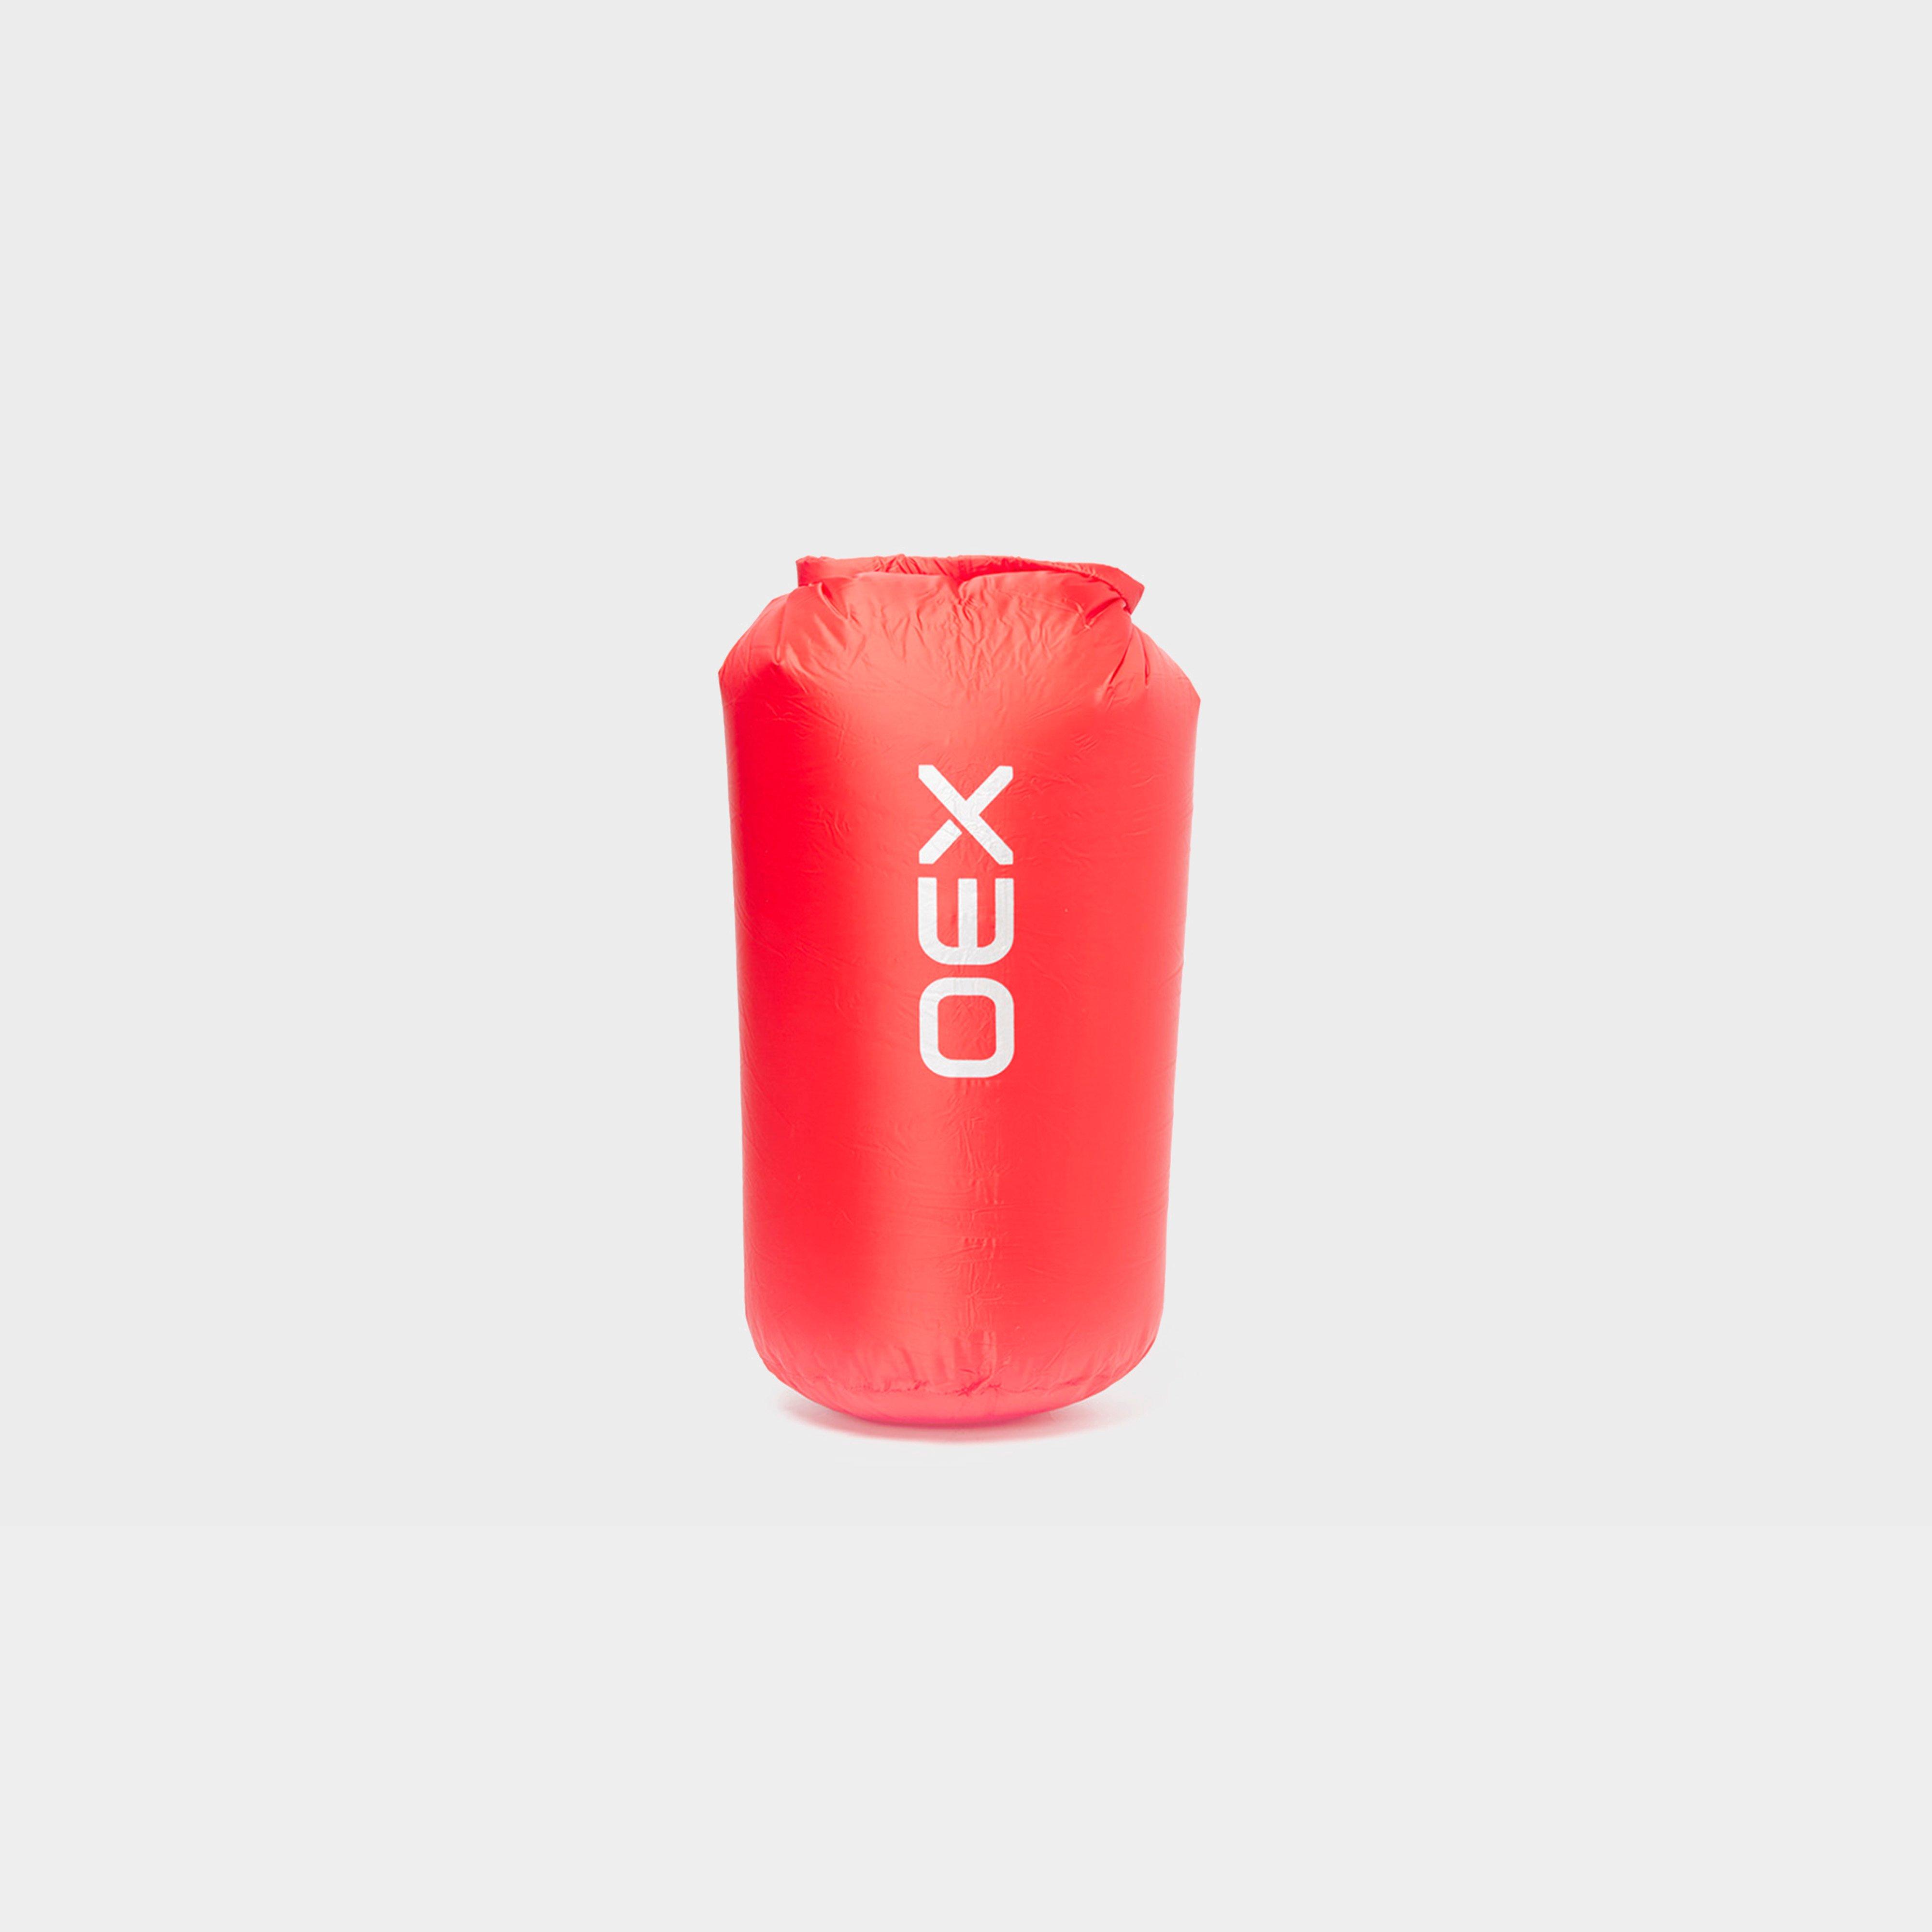 Oex 5 Litre Drysac - Red/red  Red/red